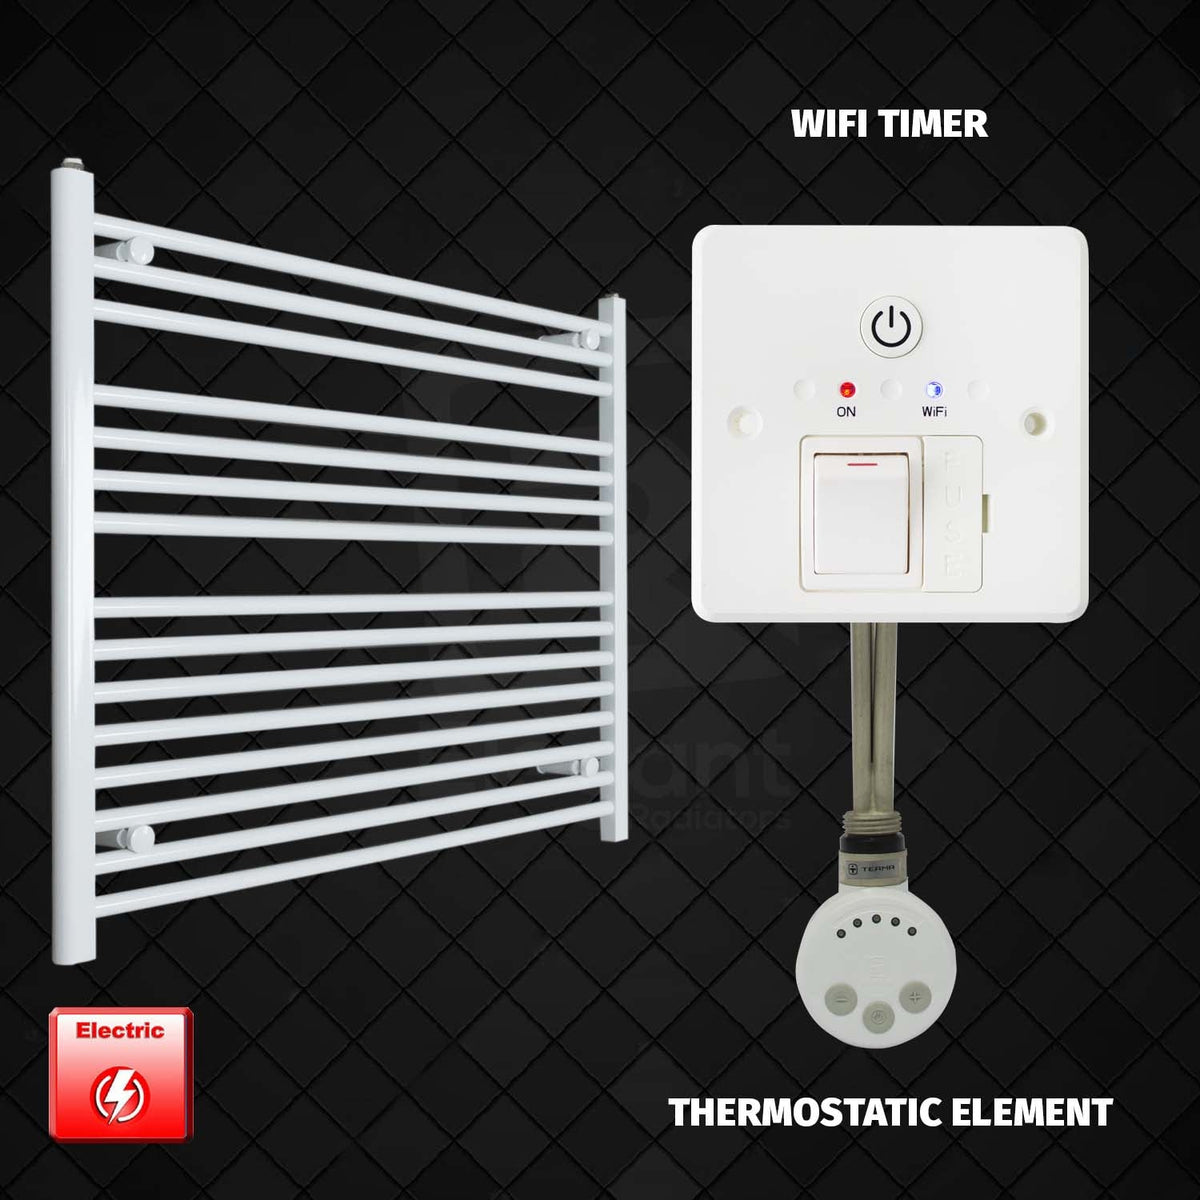 800 mm High 1100 mm Wide Pre-Filled Electric Heated Towel Rail Radiator White HTR MOA Thermostatic element Wifi timer